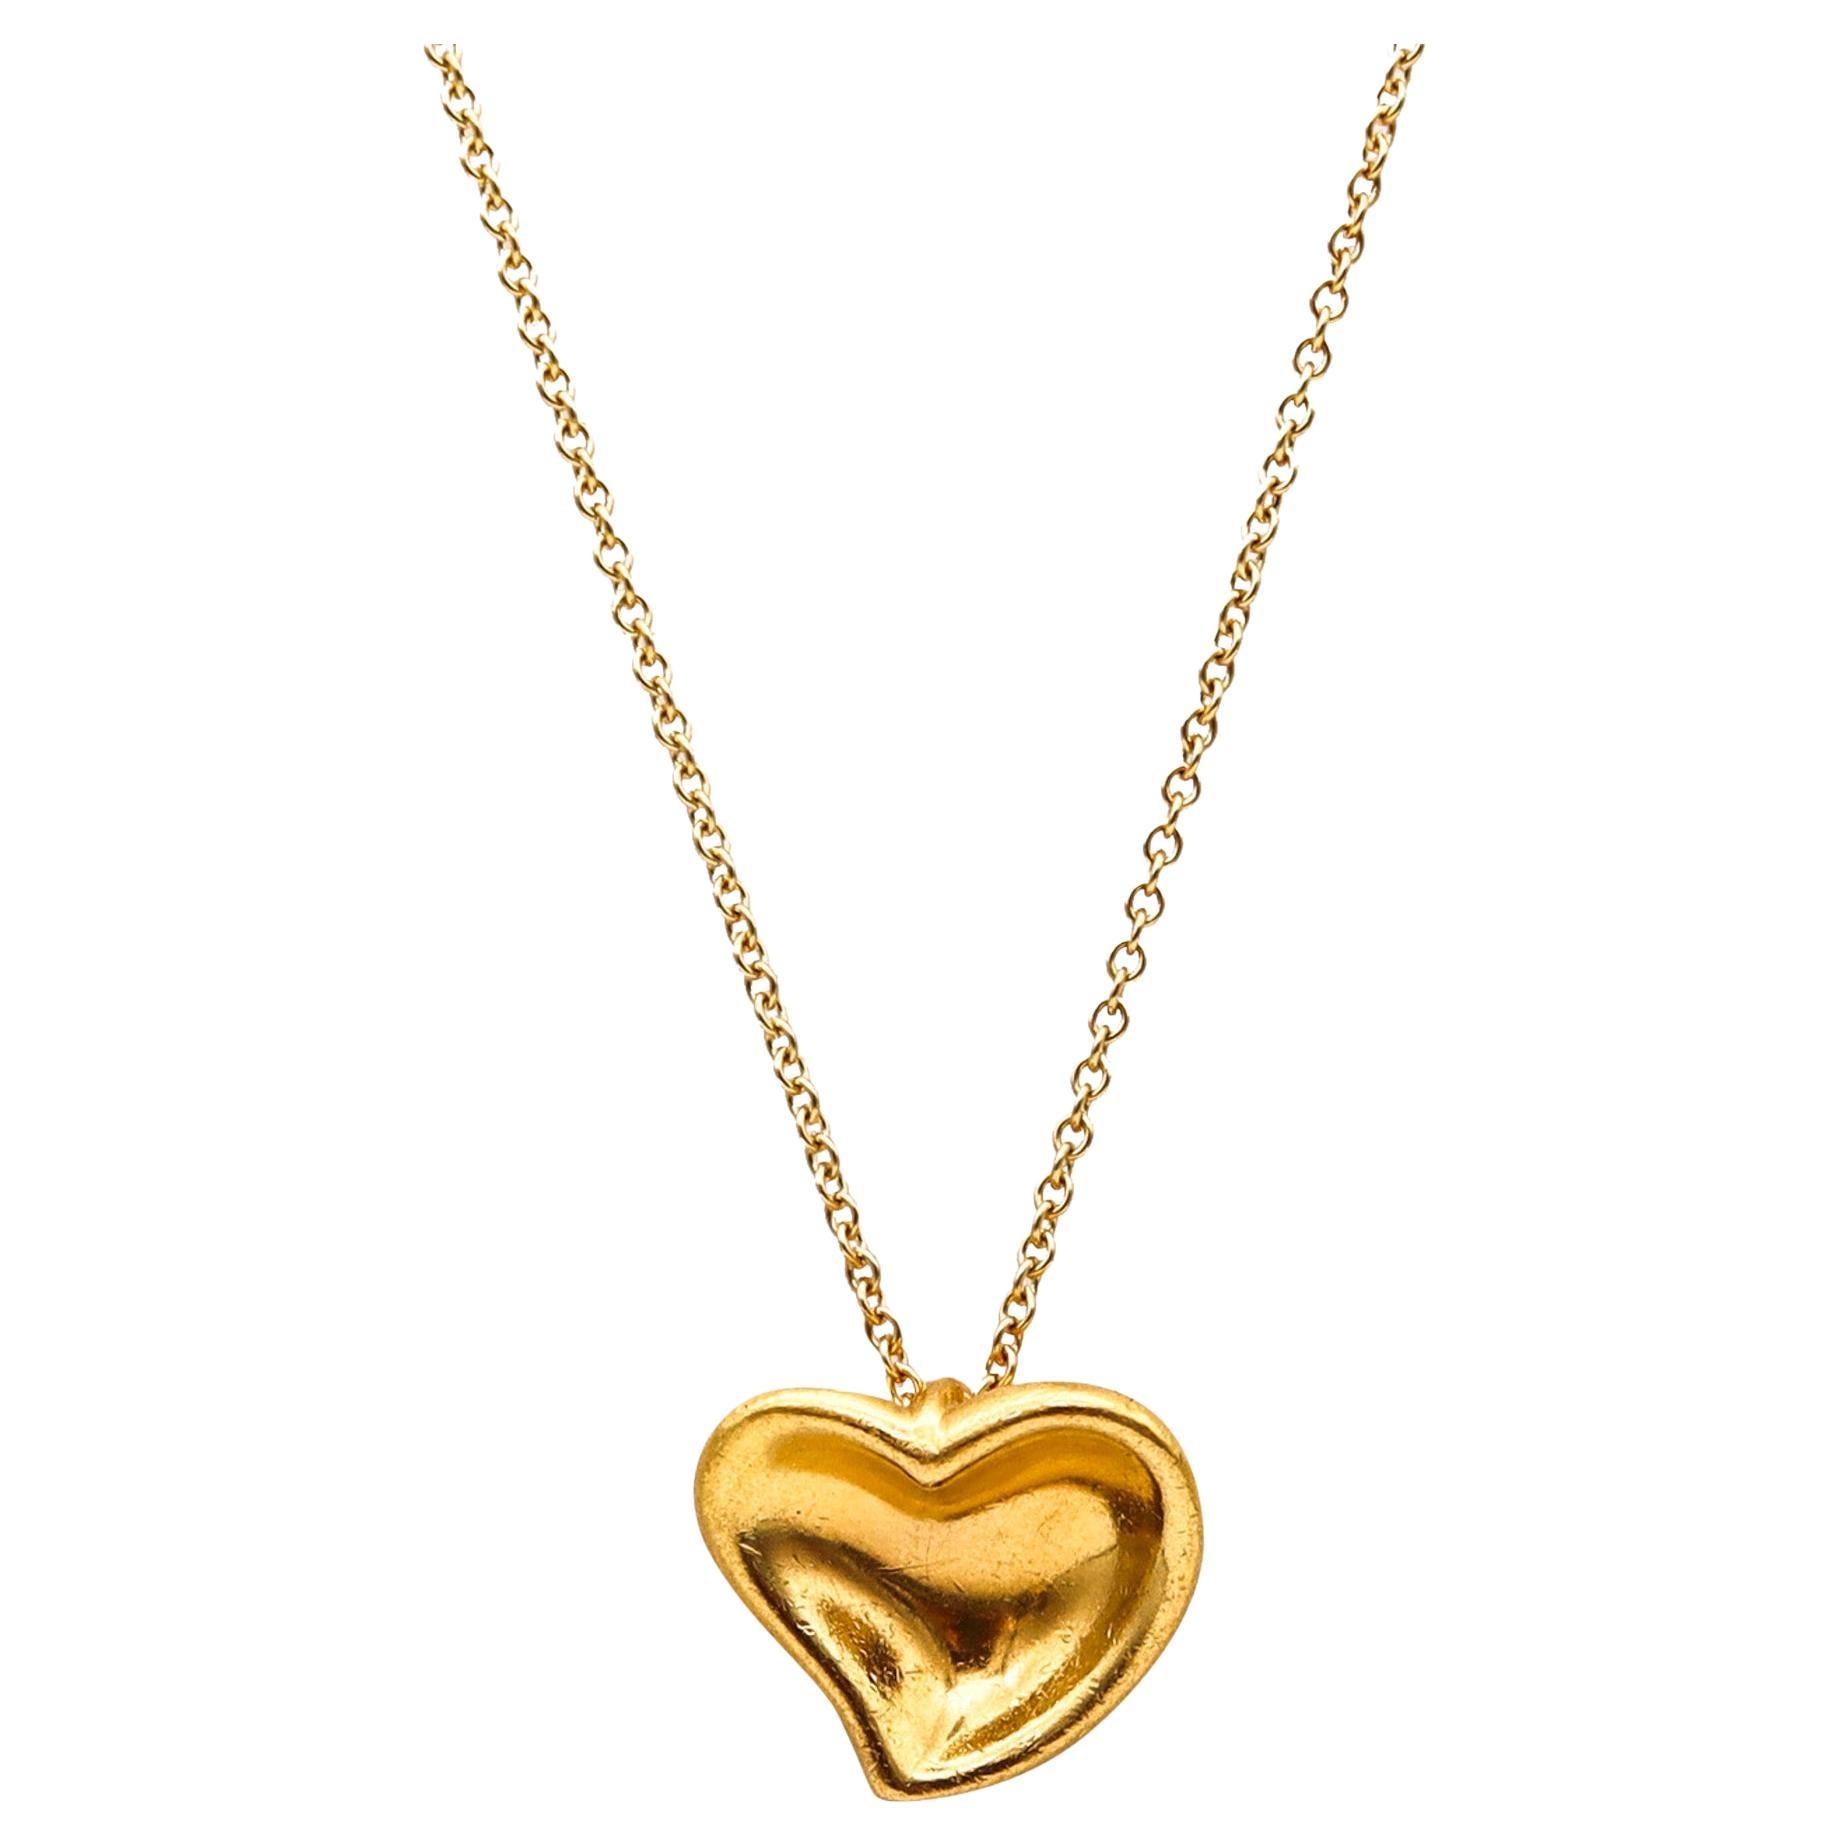 Tiffany & Co. 1980 Elsa Peretti Heart Necklace In 24Kt And 18Kt Yellow Gold